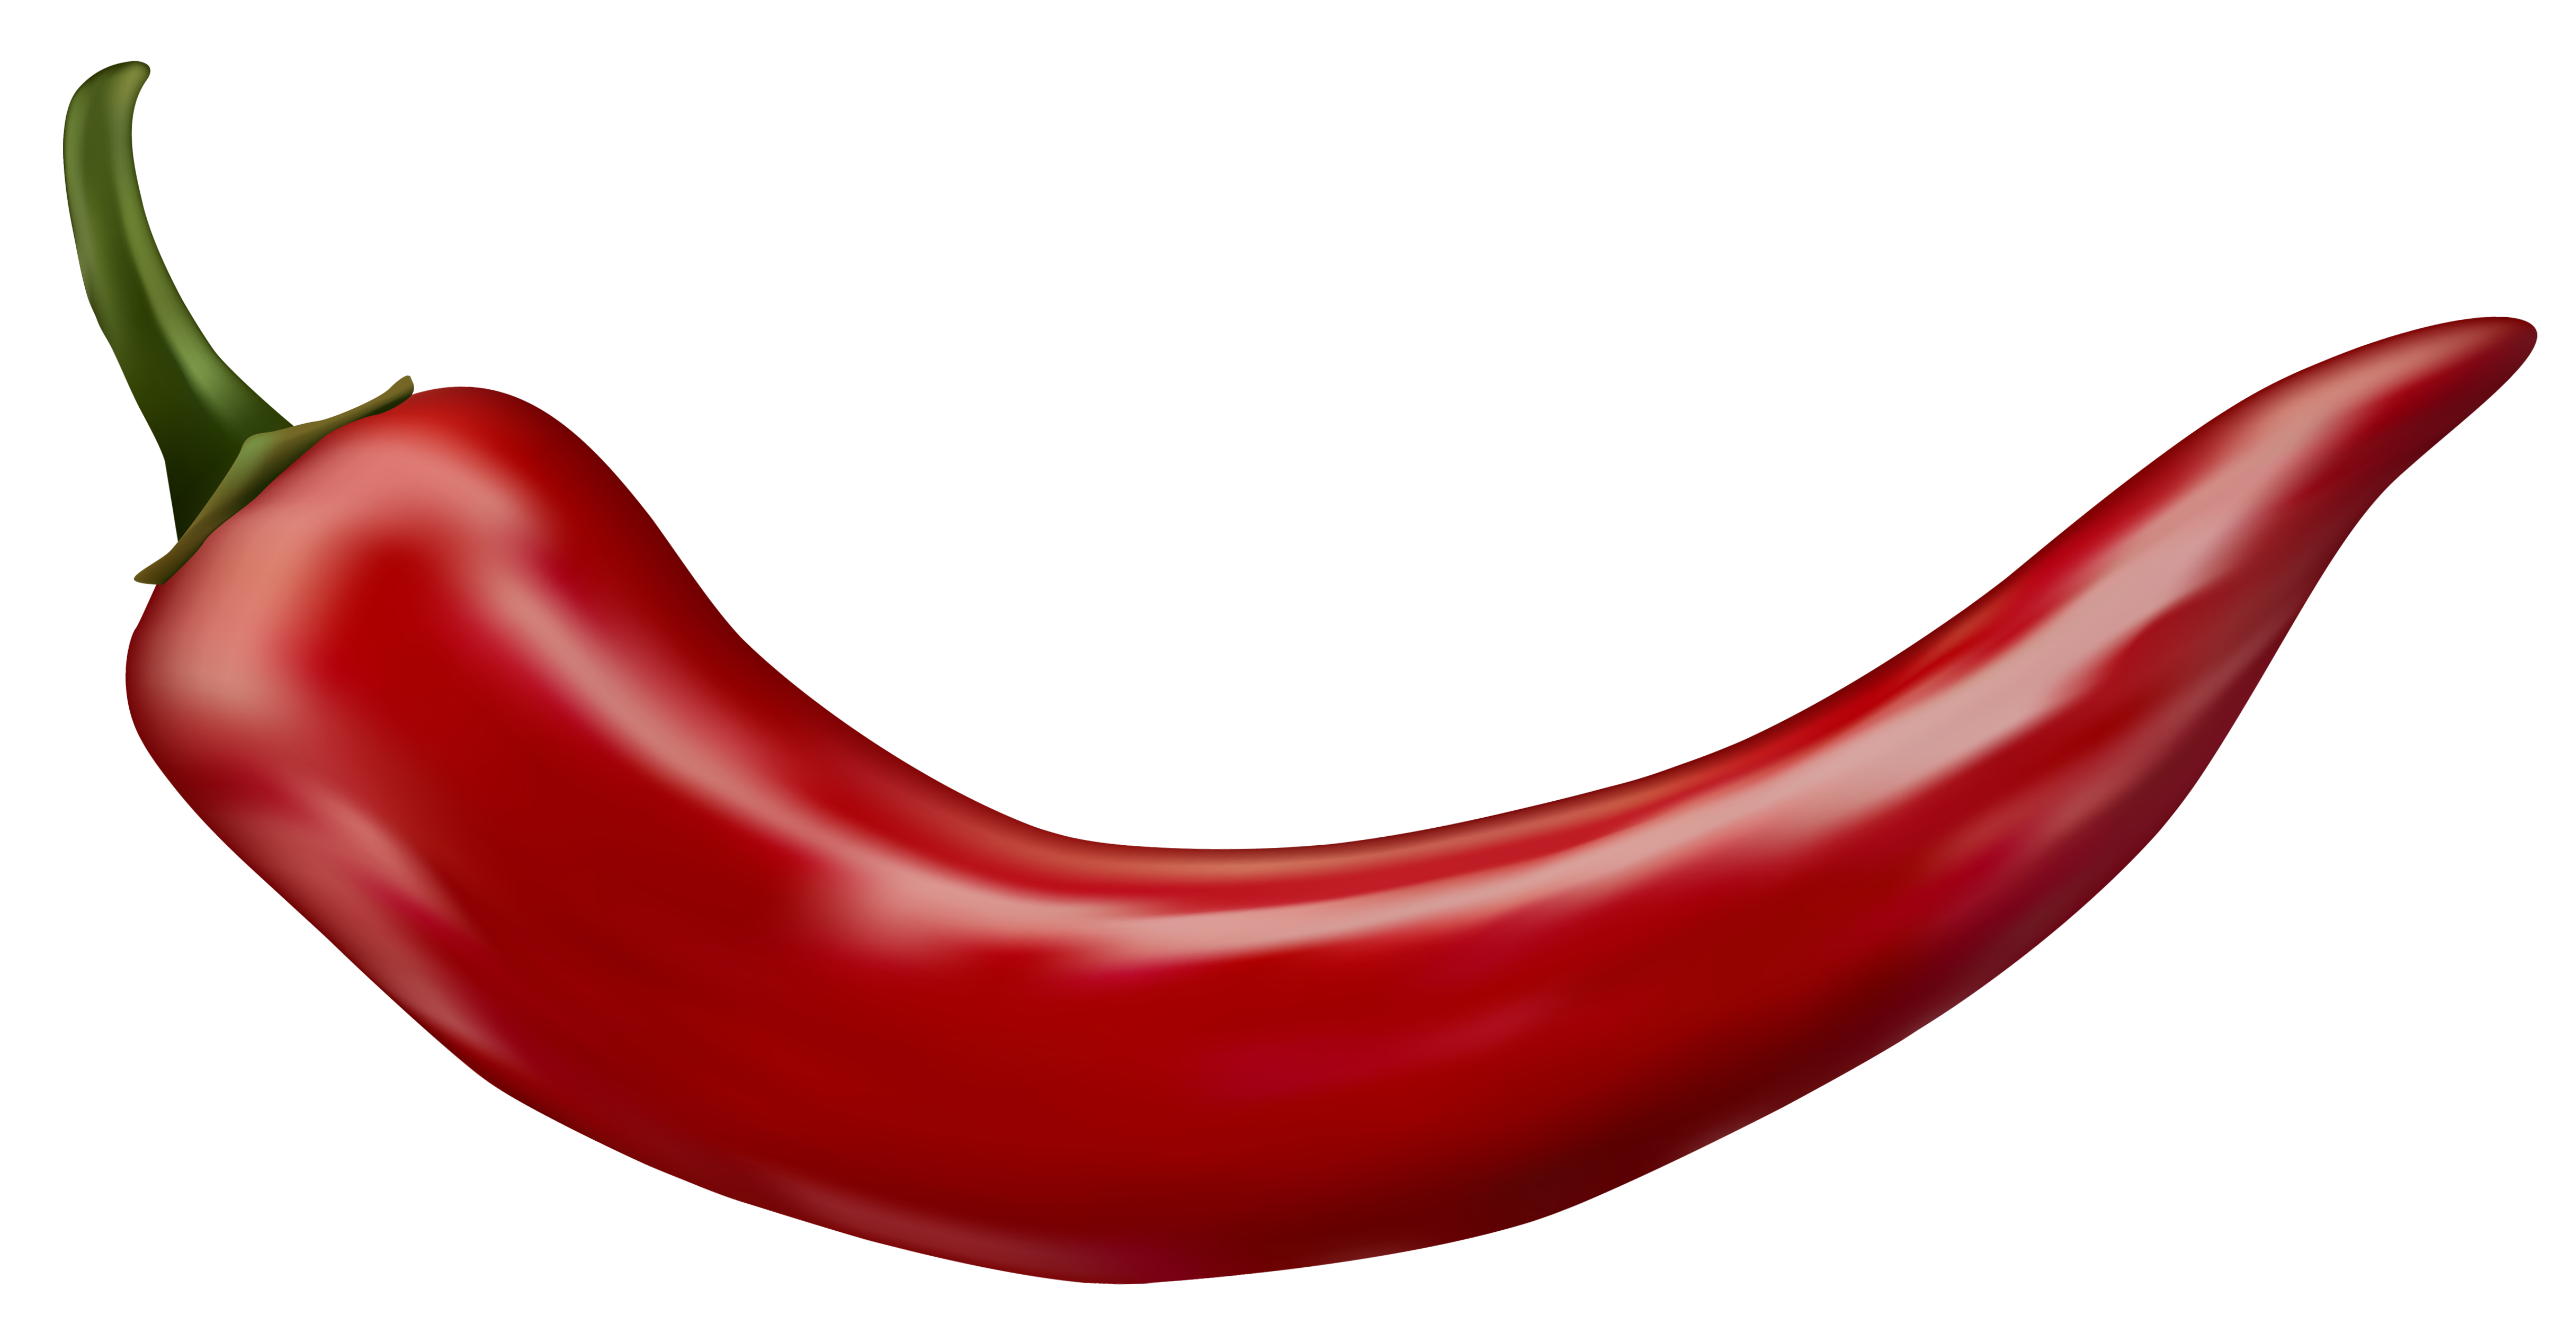 Red Chili Pepper Transparent PNG Clip Art Image